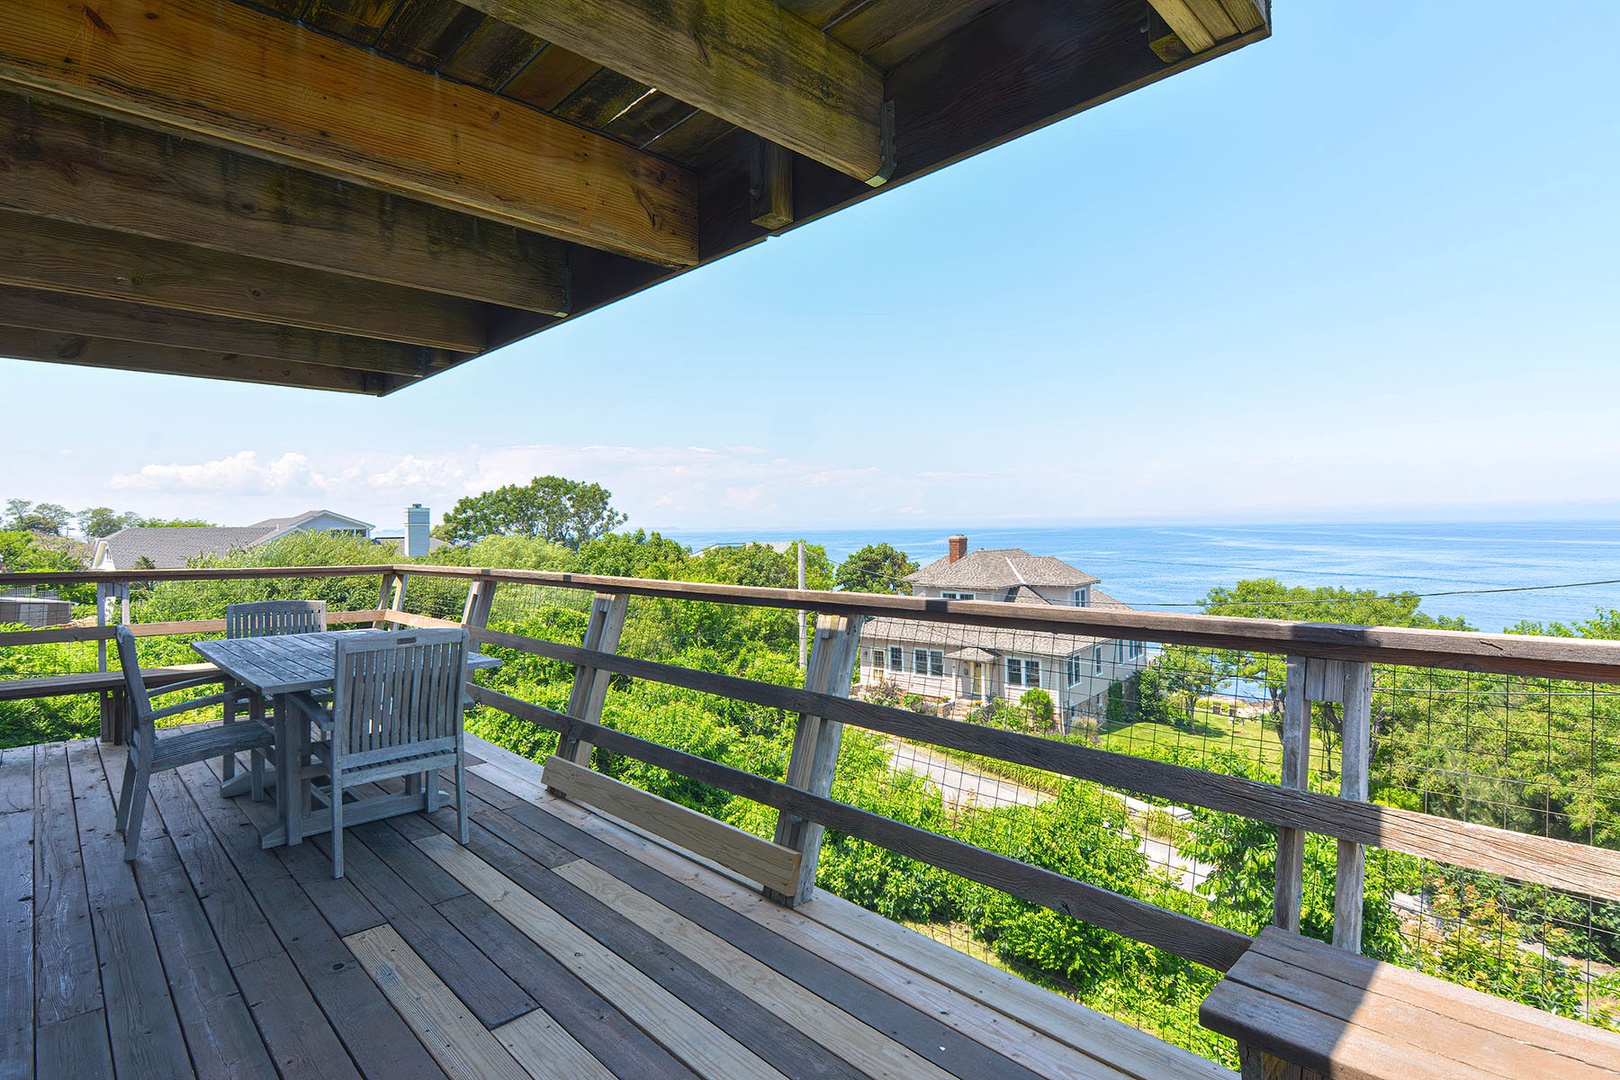 Step out onto the deck for views and the sea breeze.